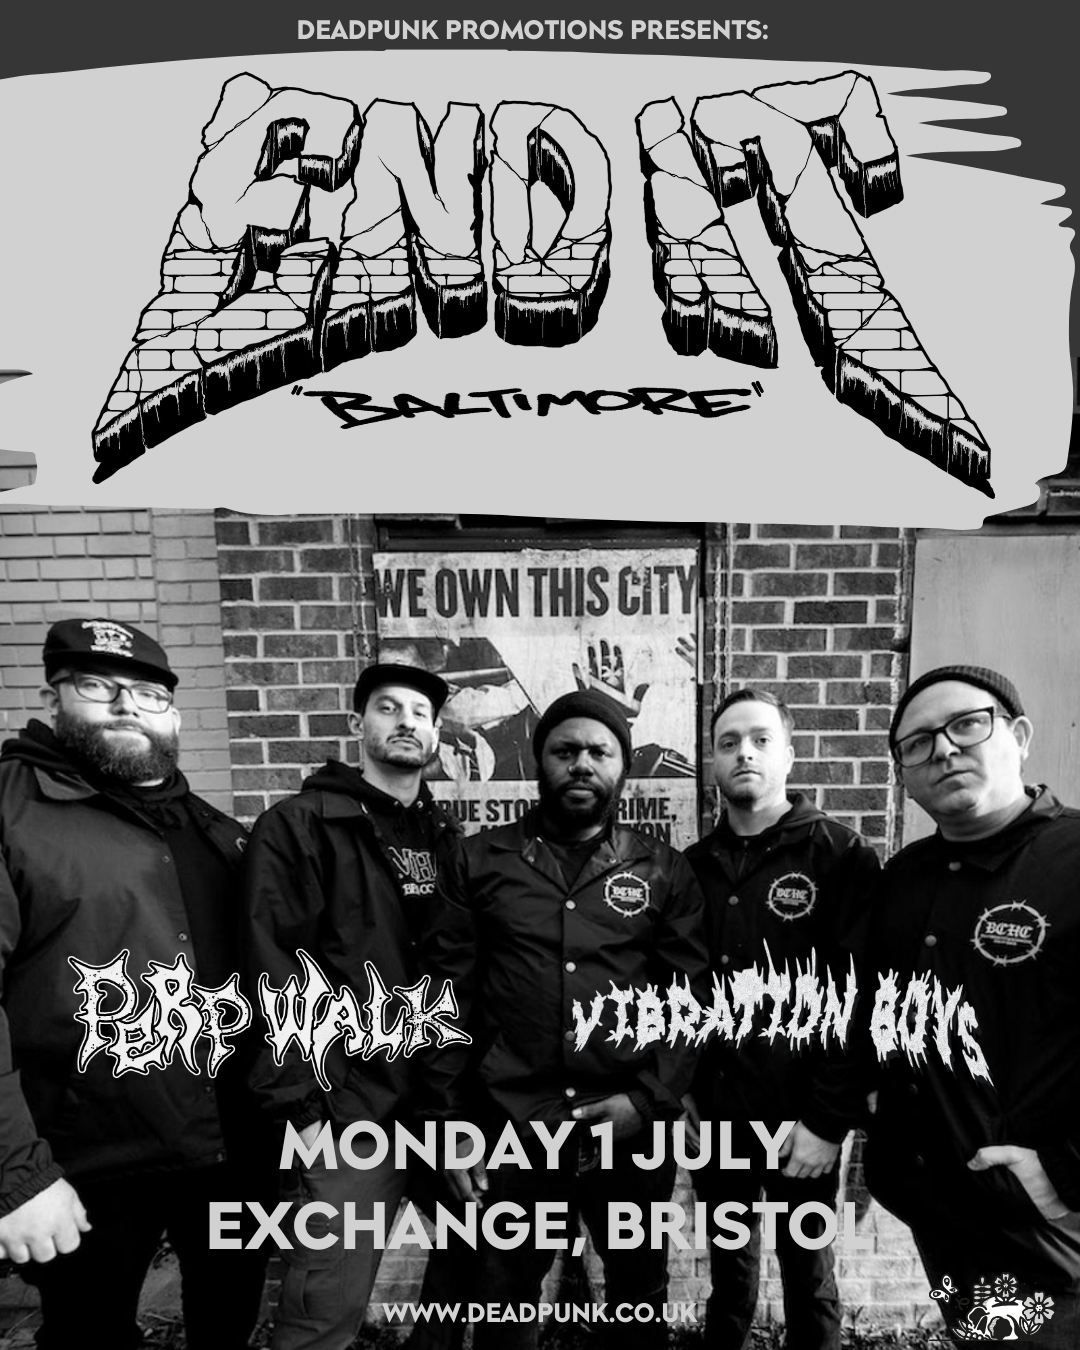 End It, Perp Walk and Vibration Boys at Exchange, Bristol